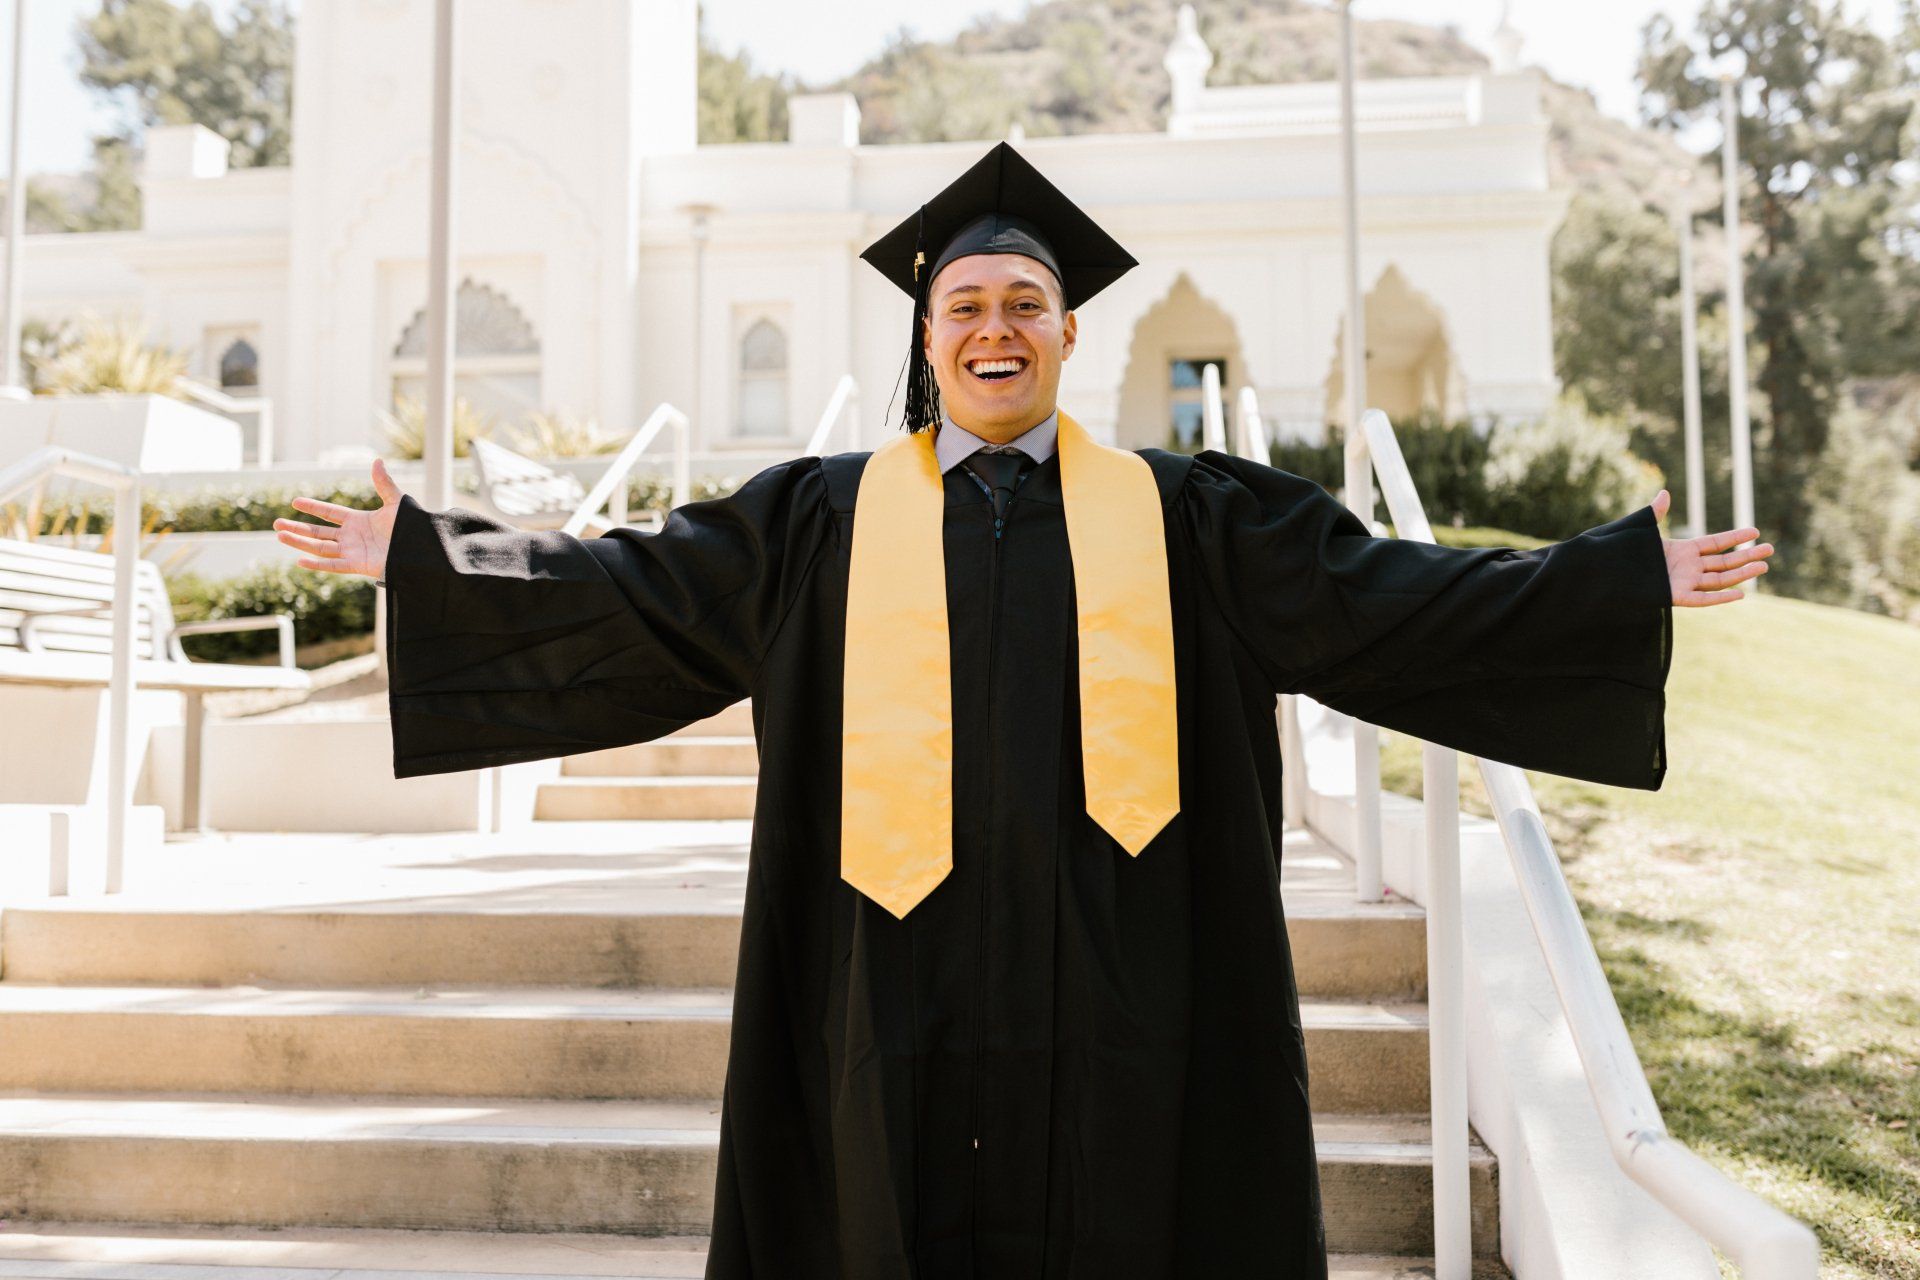 A Young white man in black cap & gown with yellow valedictorian sash over his shoulders